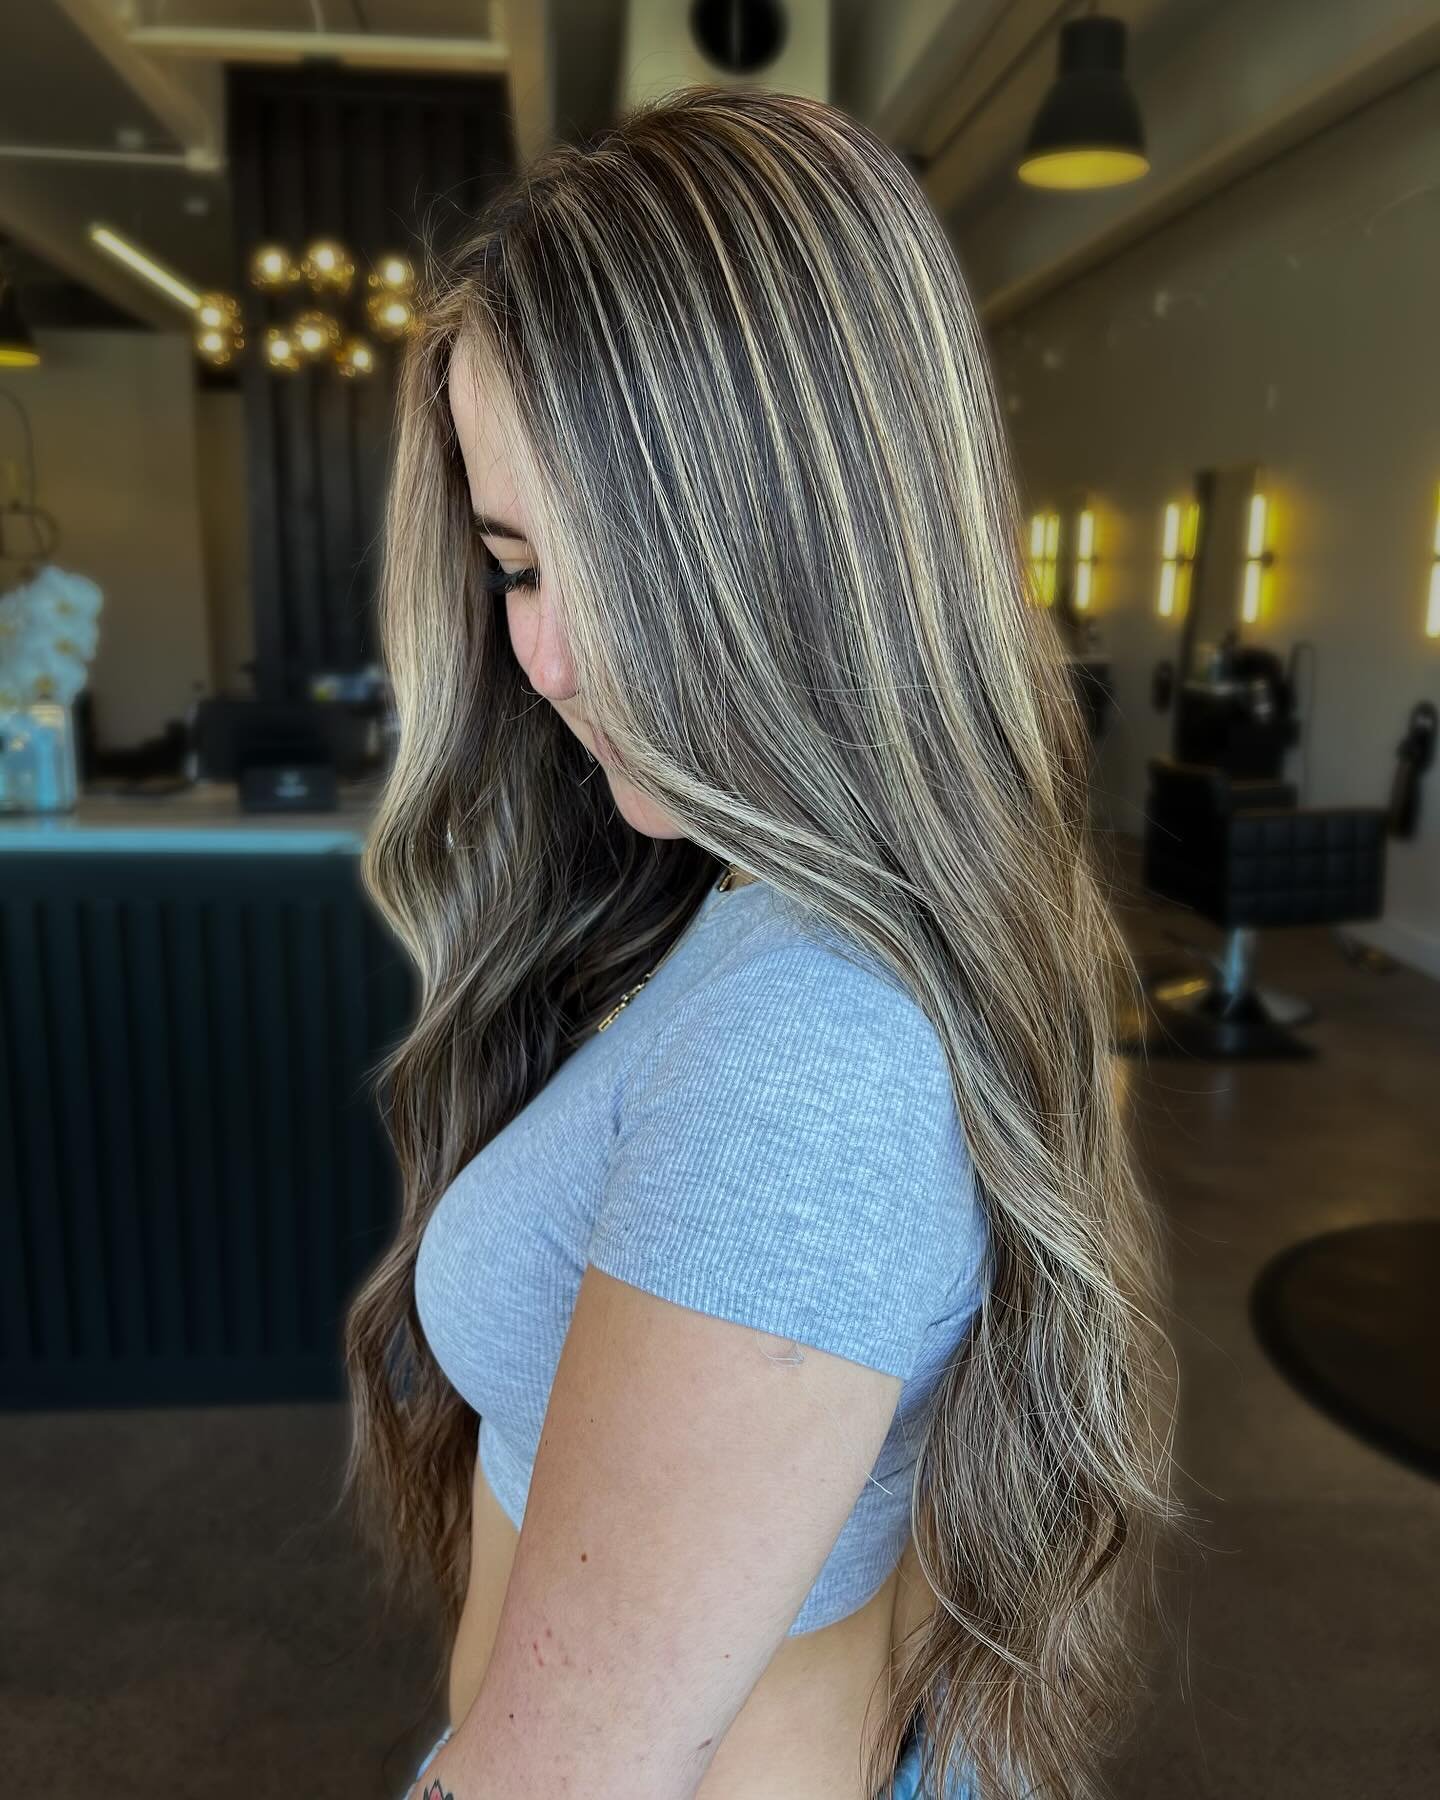 🌟✨ Super Cute &amp; Flirty Alert! ✨🌟

Swipe to check out this beautiful transformation done by our color expert, Gabriella! 💇&zwj;♀️💖 Who else is ready for summer vibes? 🌞

Drop a heart 💗 if you&rsquo;re thinking about a new summer look, and bo